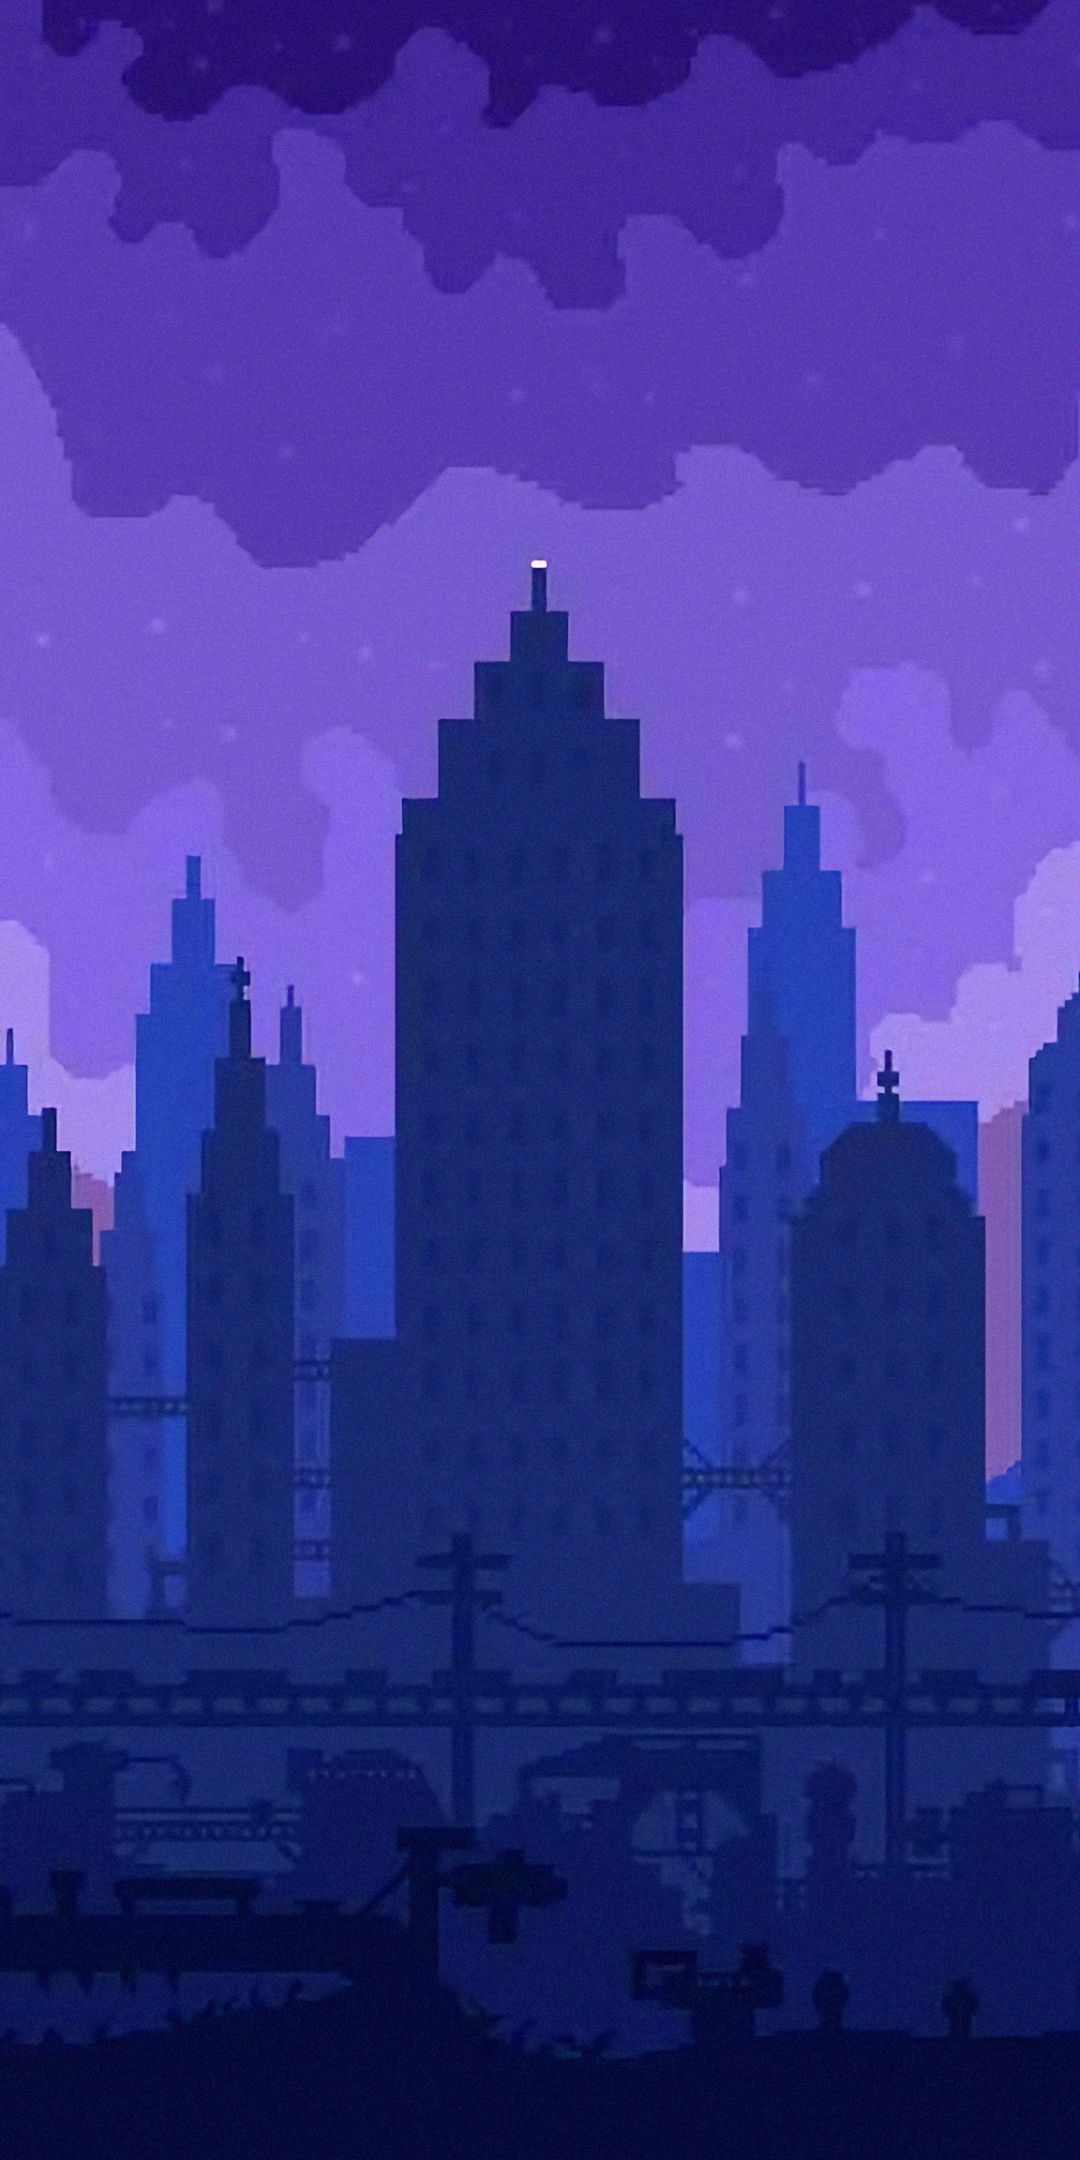 High skies, buildings, silhouette, cityscape, pixel art wallpaper. Pixel art landscape, Pixel art background, Cityscape wallpaper